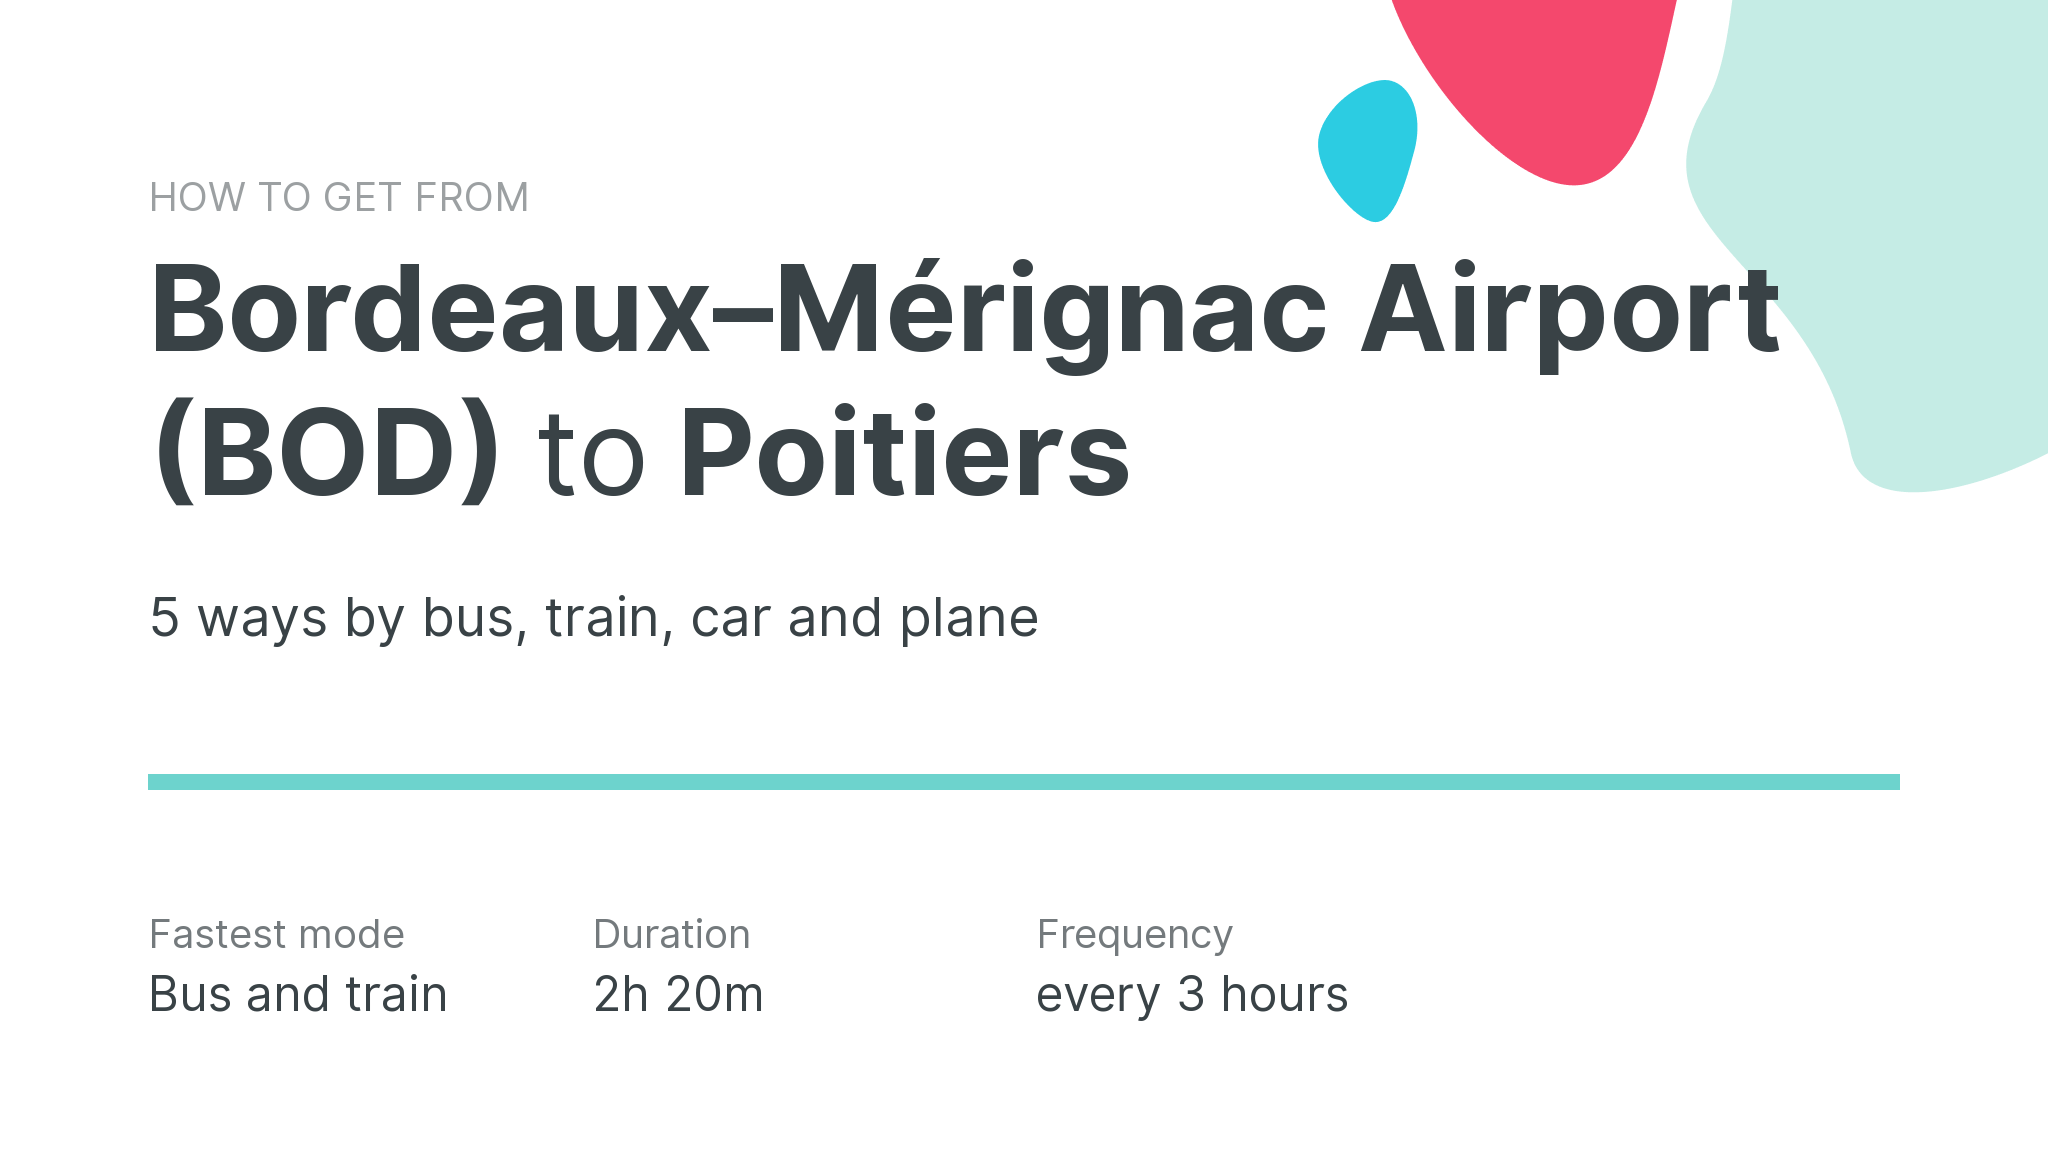 How do I get from Bordeaux–Mérignac Airport (BOD) to Poitiers